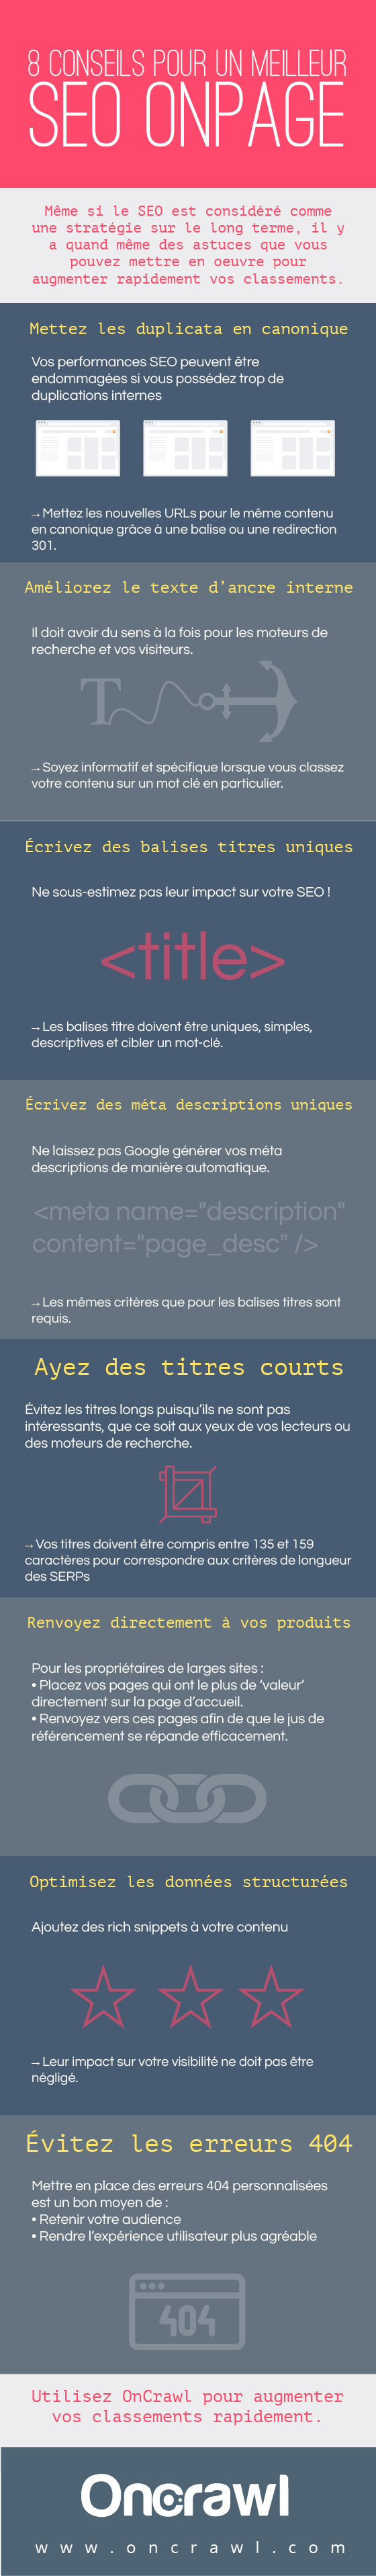 infographie-8-actuces-seo-onpage